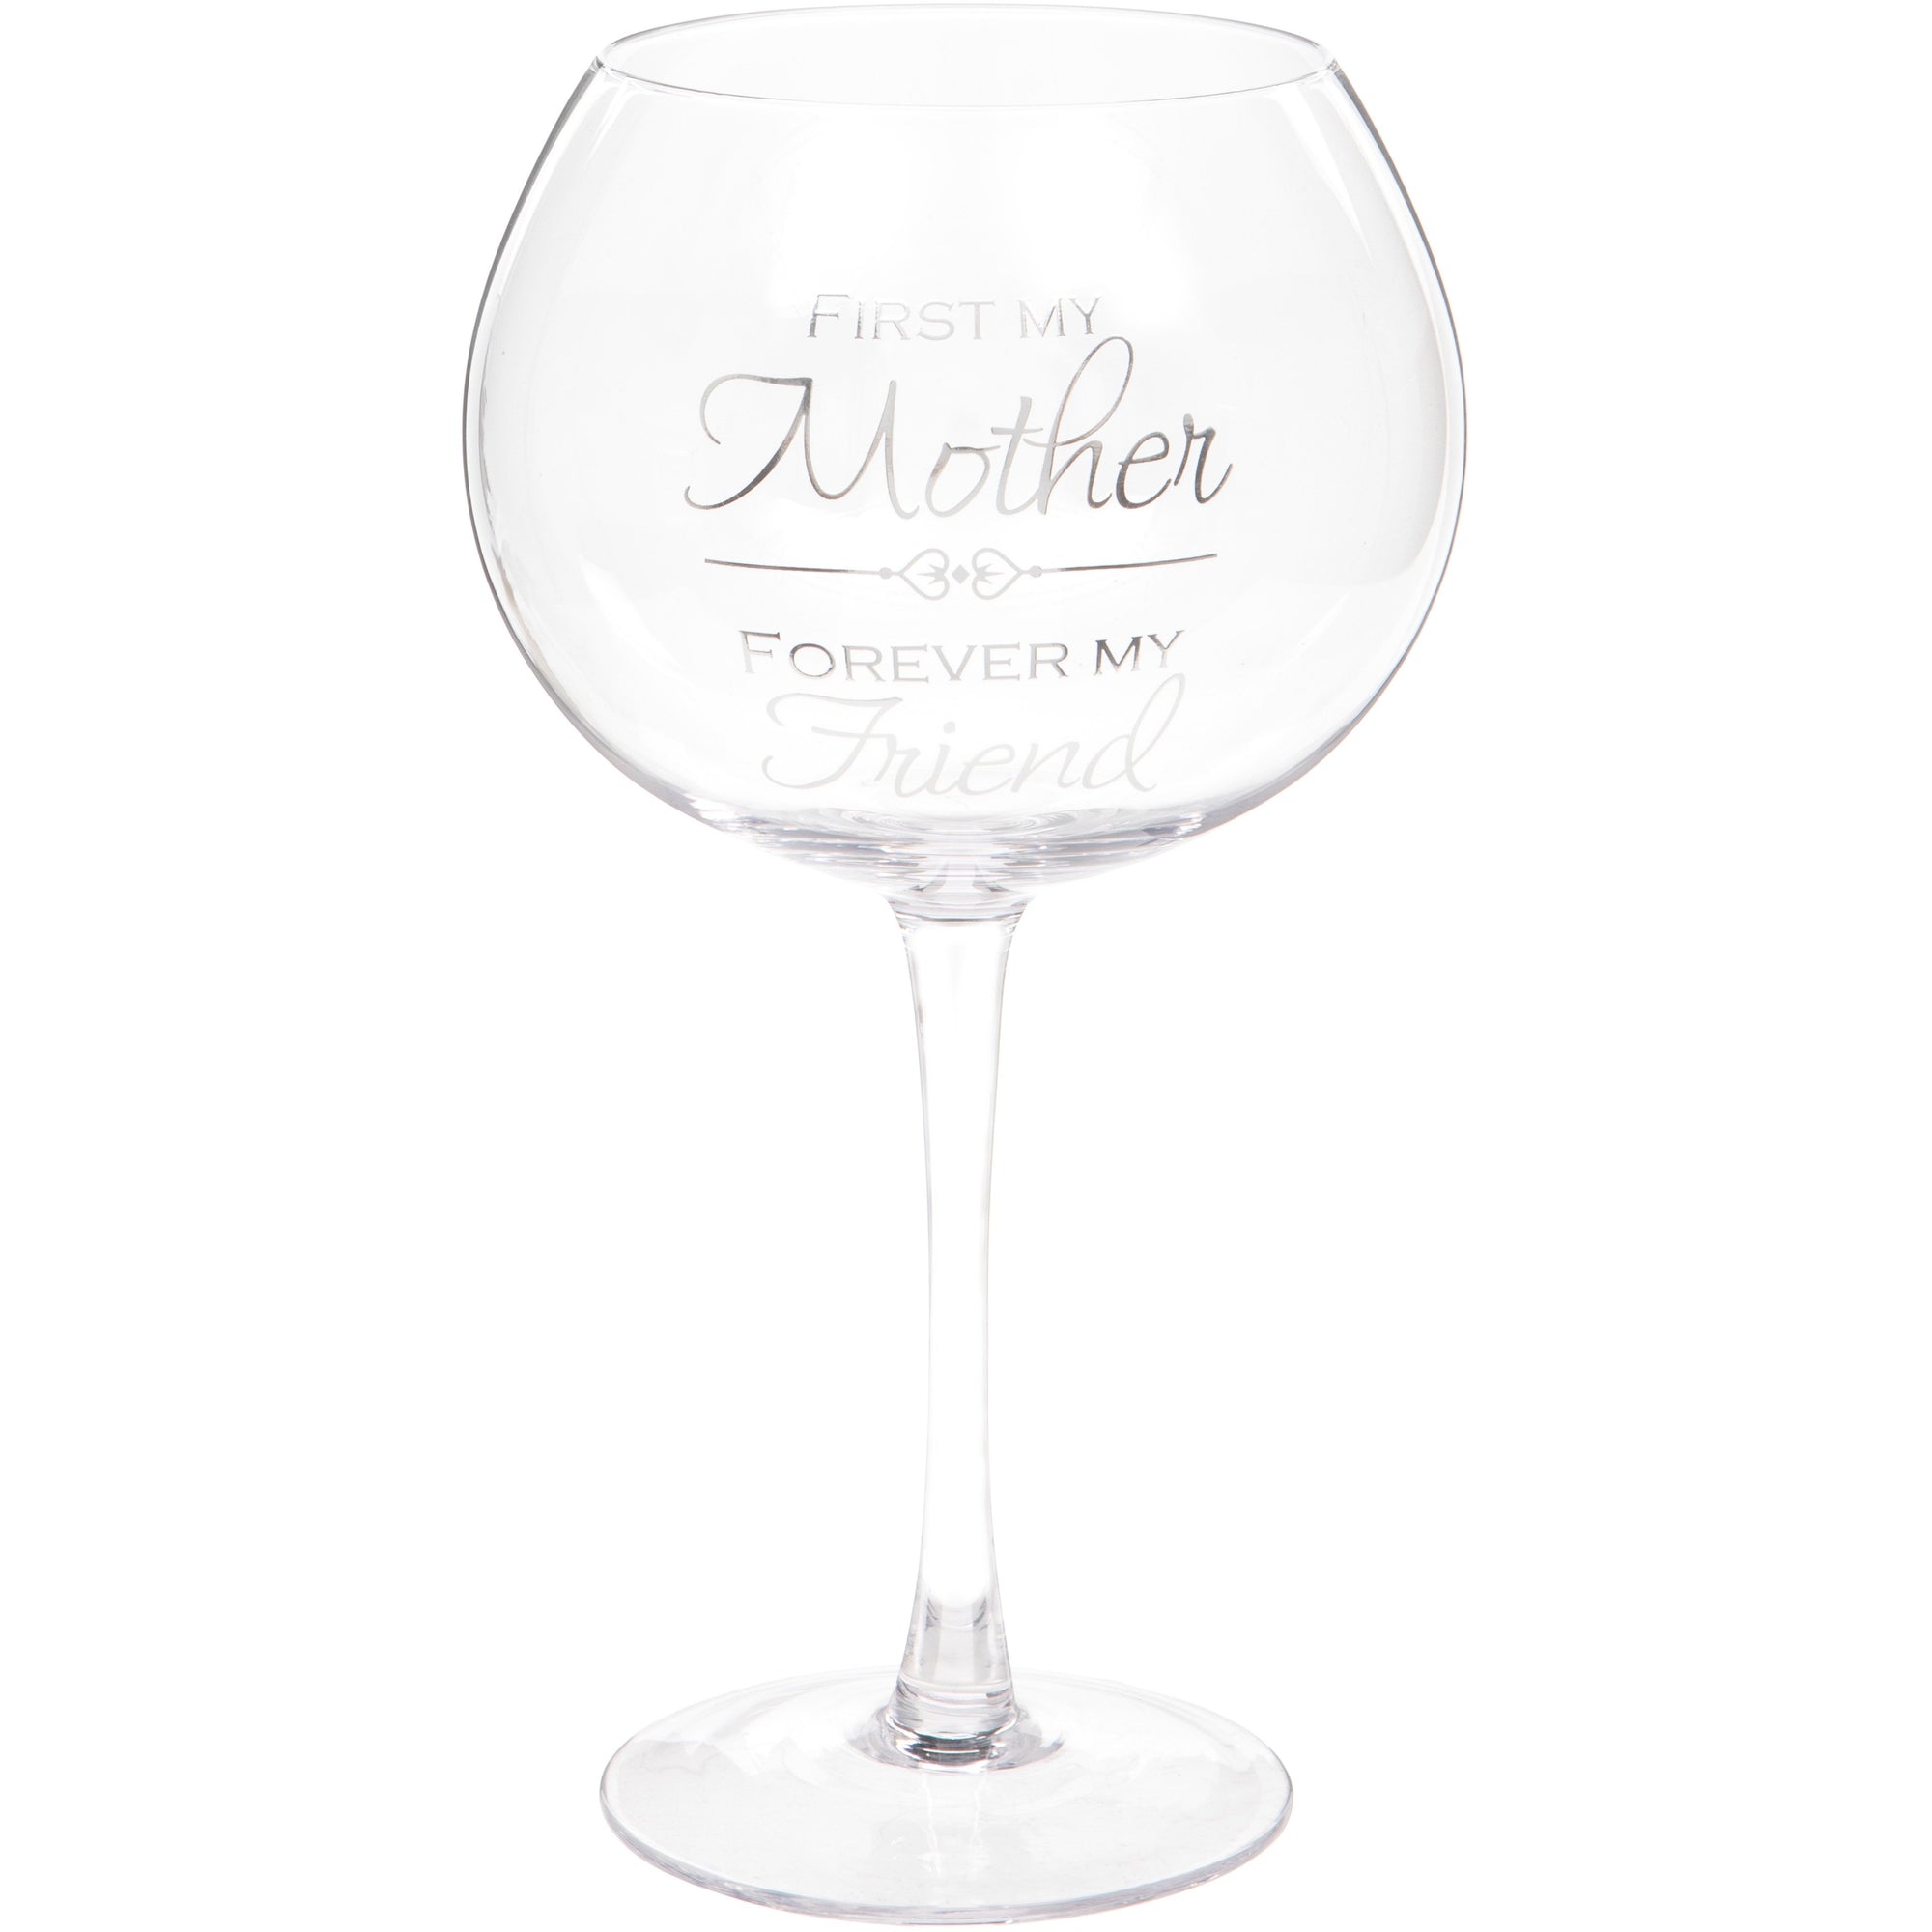 Mother Gin Glass